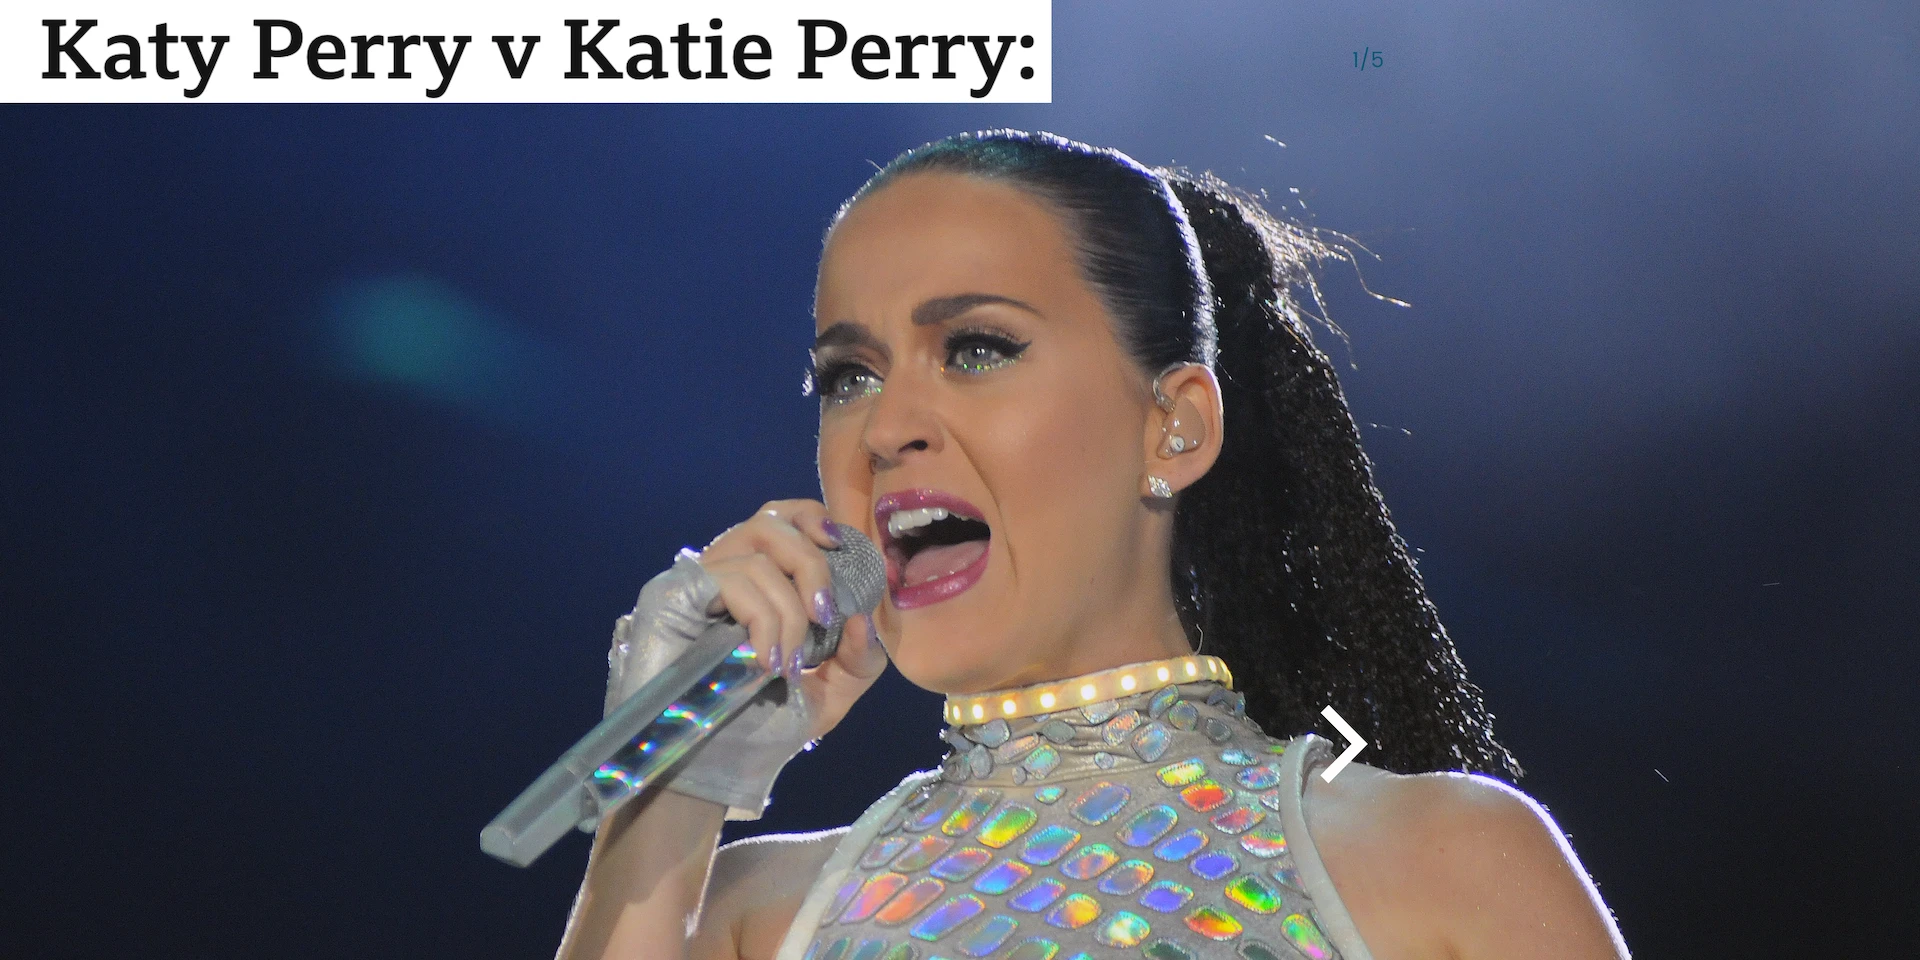  Katy Perry Loses Trademark Battle: Australian Fashion Designer Katie Perry Emerges Victorious